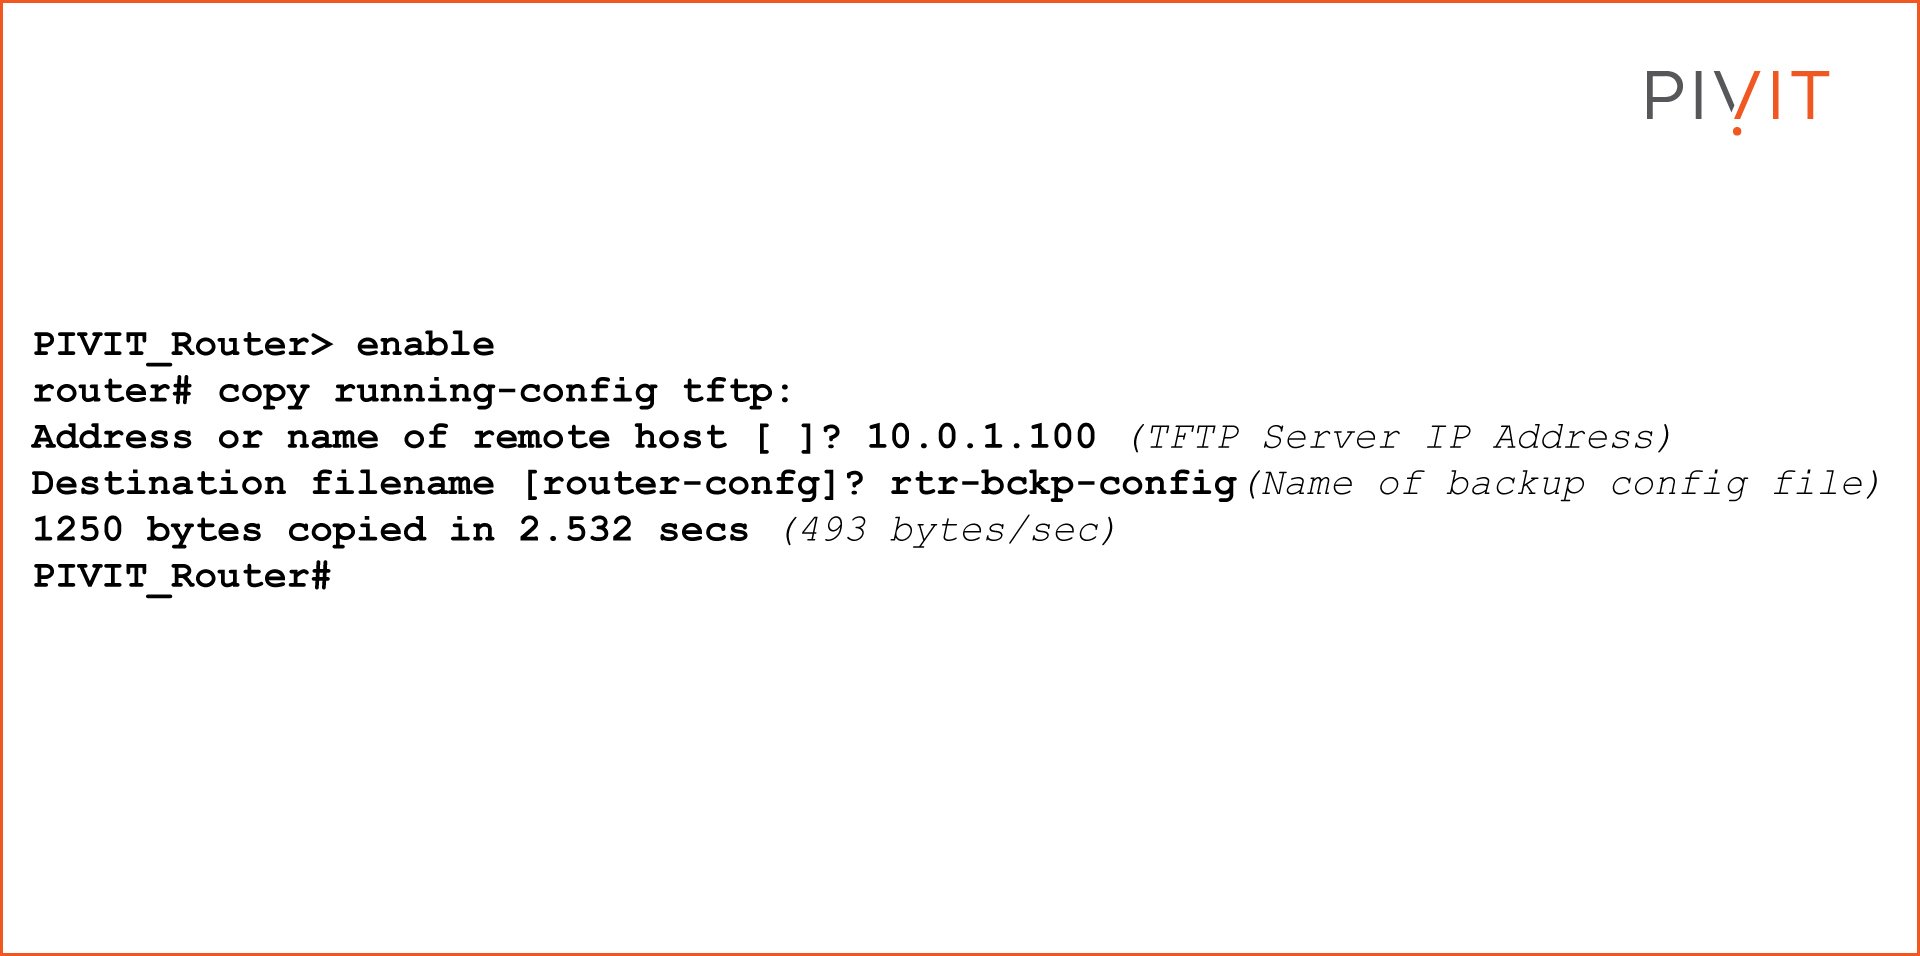 Copy the configuration to the TFTP server